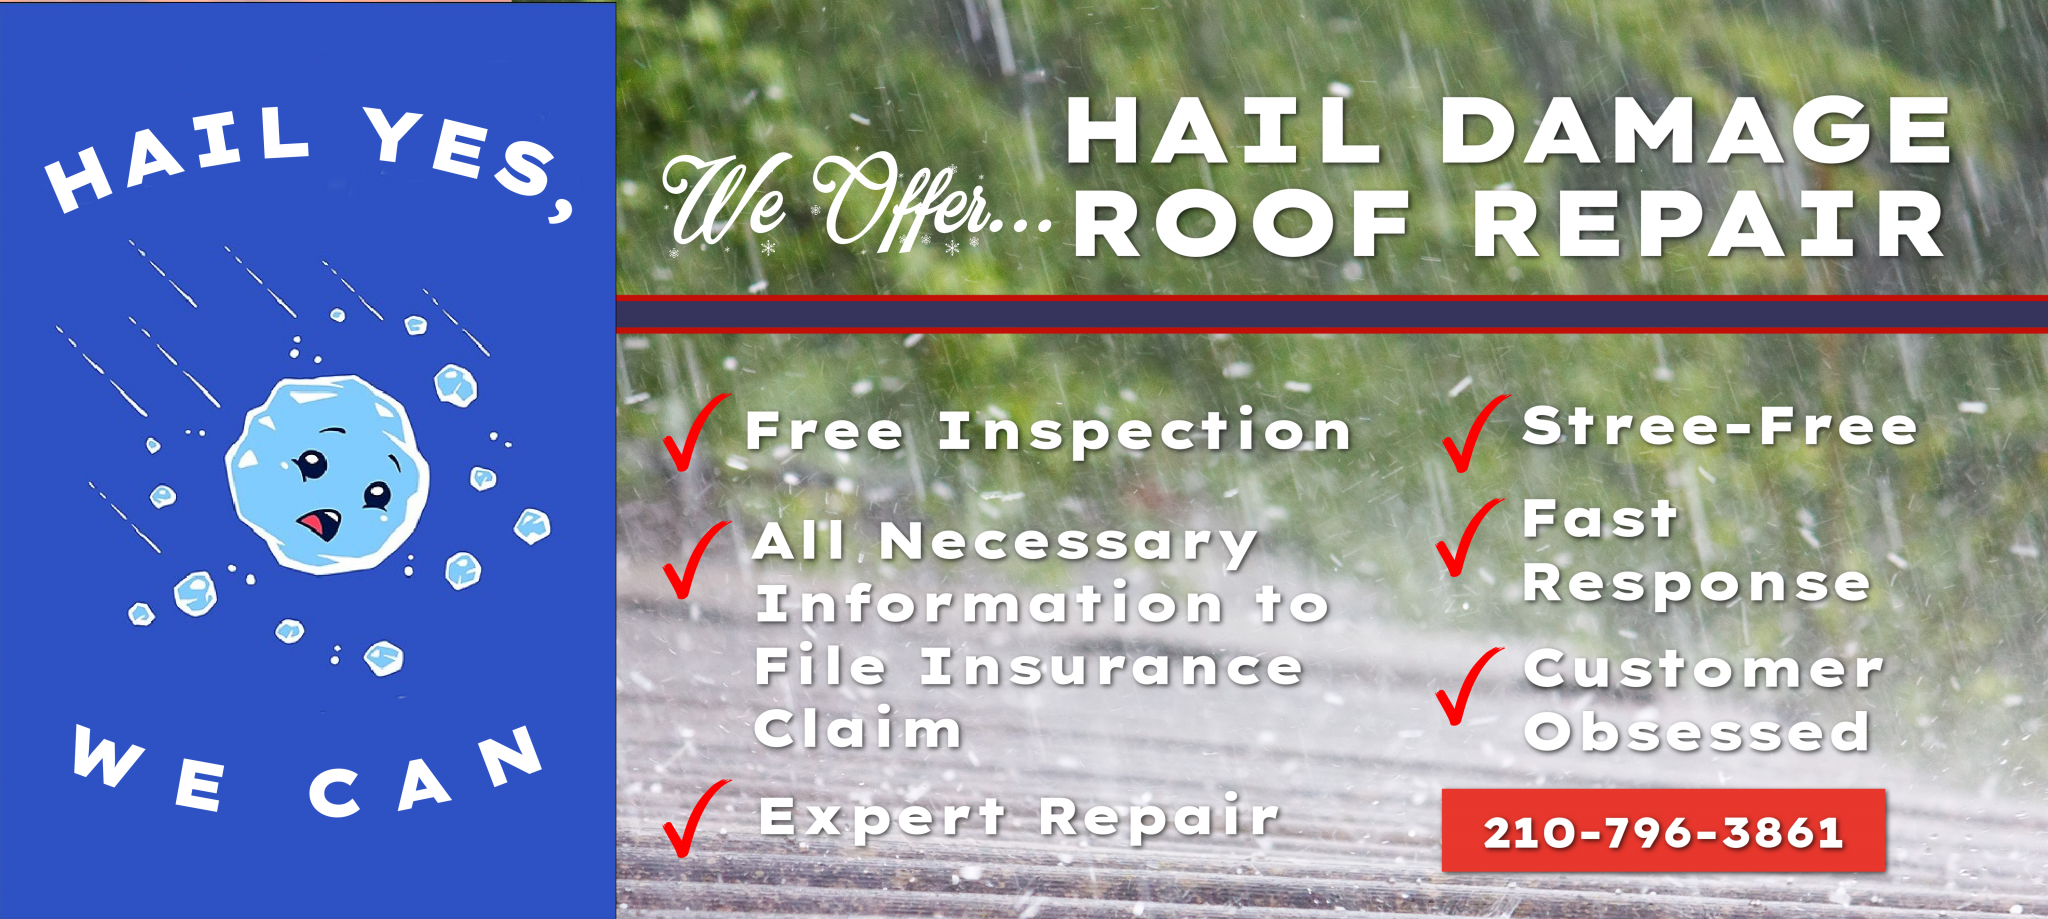 Roof being hit by hail with WeatherTech's offer for hail damage repairs, free inspections, and phone number.